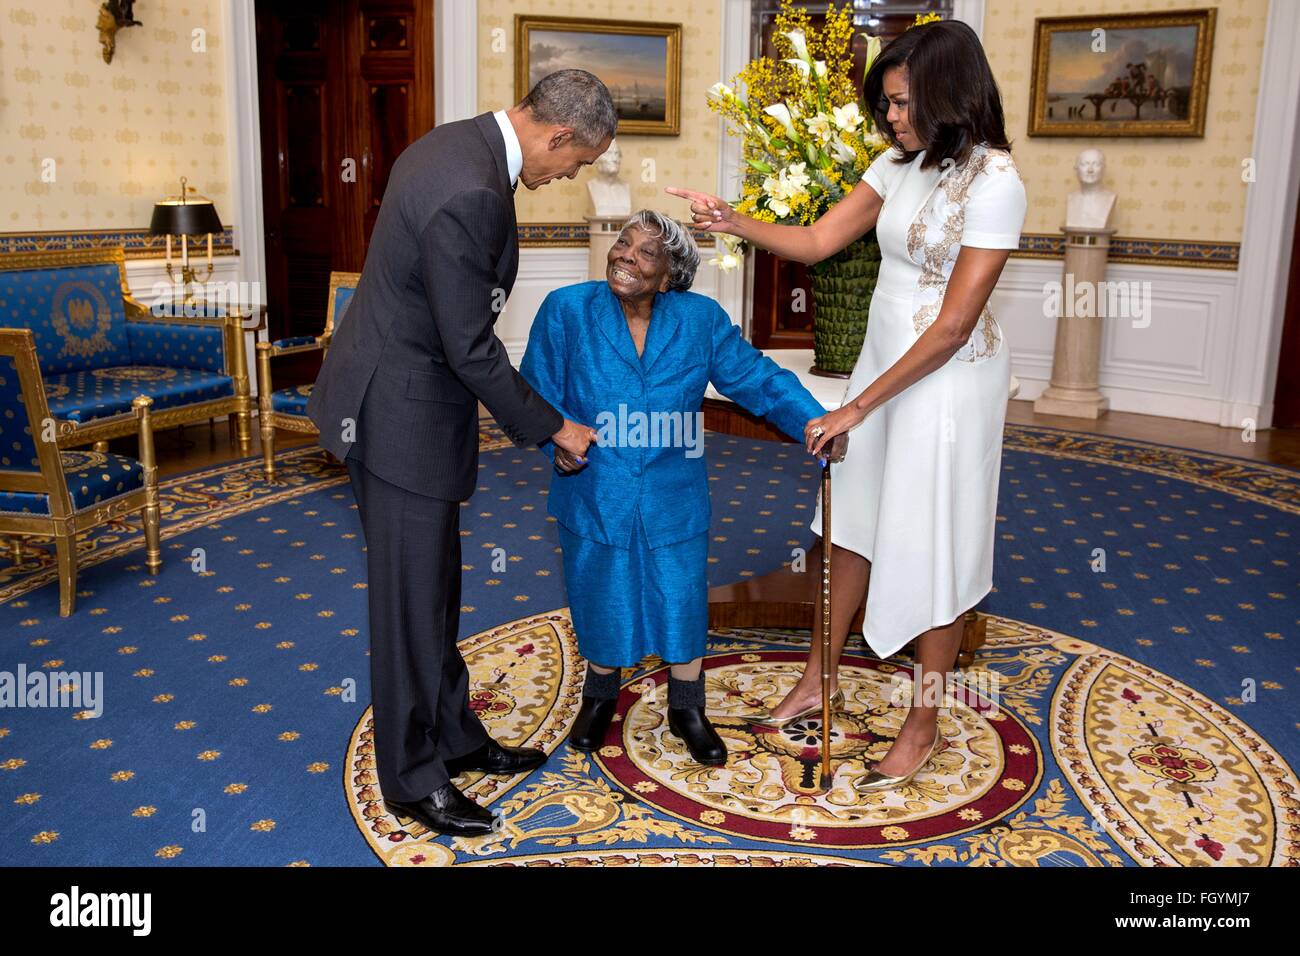 U.S. President Barack Obama and First Lady Michelle Obama greet 106-Year-Old Virginia McLaurin in the Blue Room of the White House prior to a reception celebrating African American History Month February 18, 2016 in Washington, DC. Stock Photo